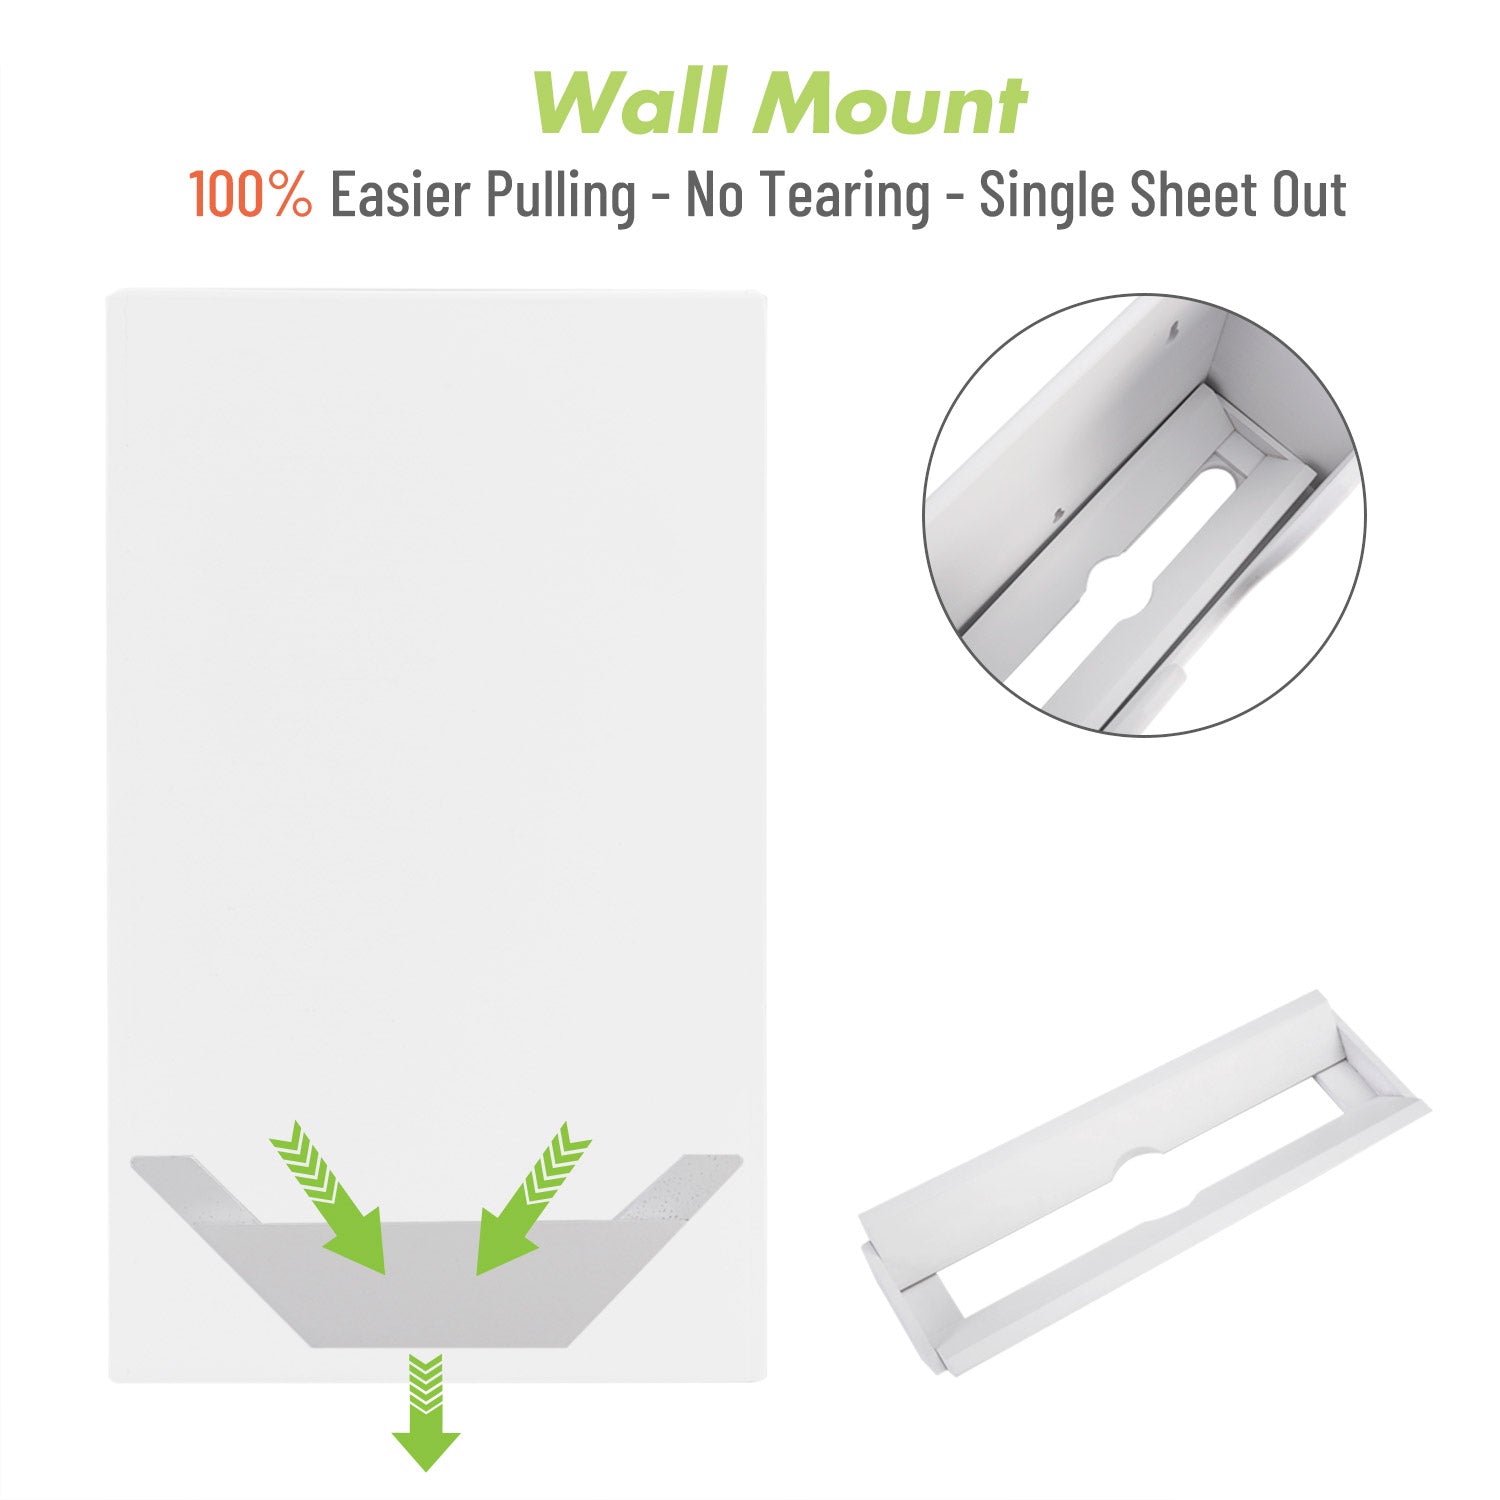 Paper Towel Wall Mount, White Rubbermaid - Lodging Kit Company